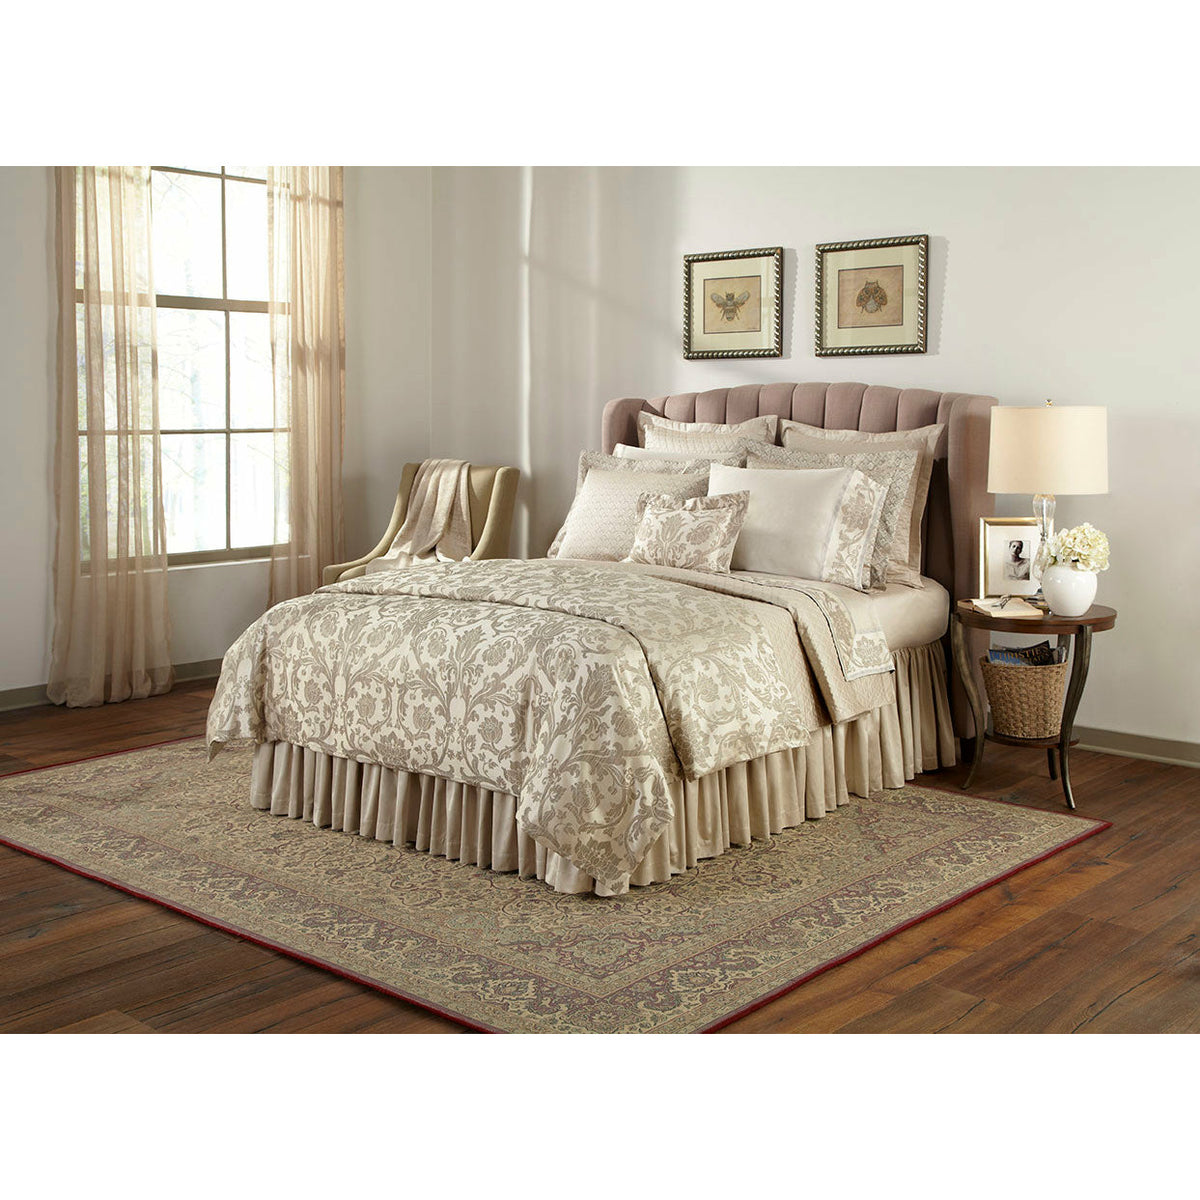 Home Treasures Anastasia Quilted Bedding Full Bed Fine Linens